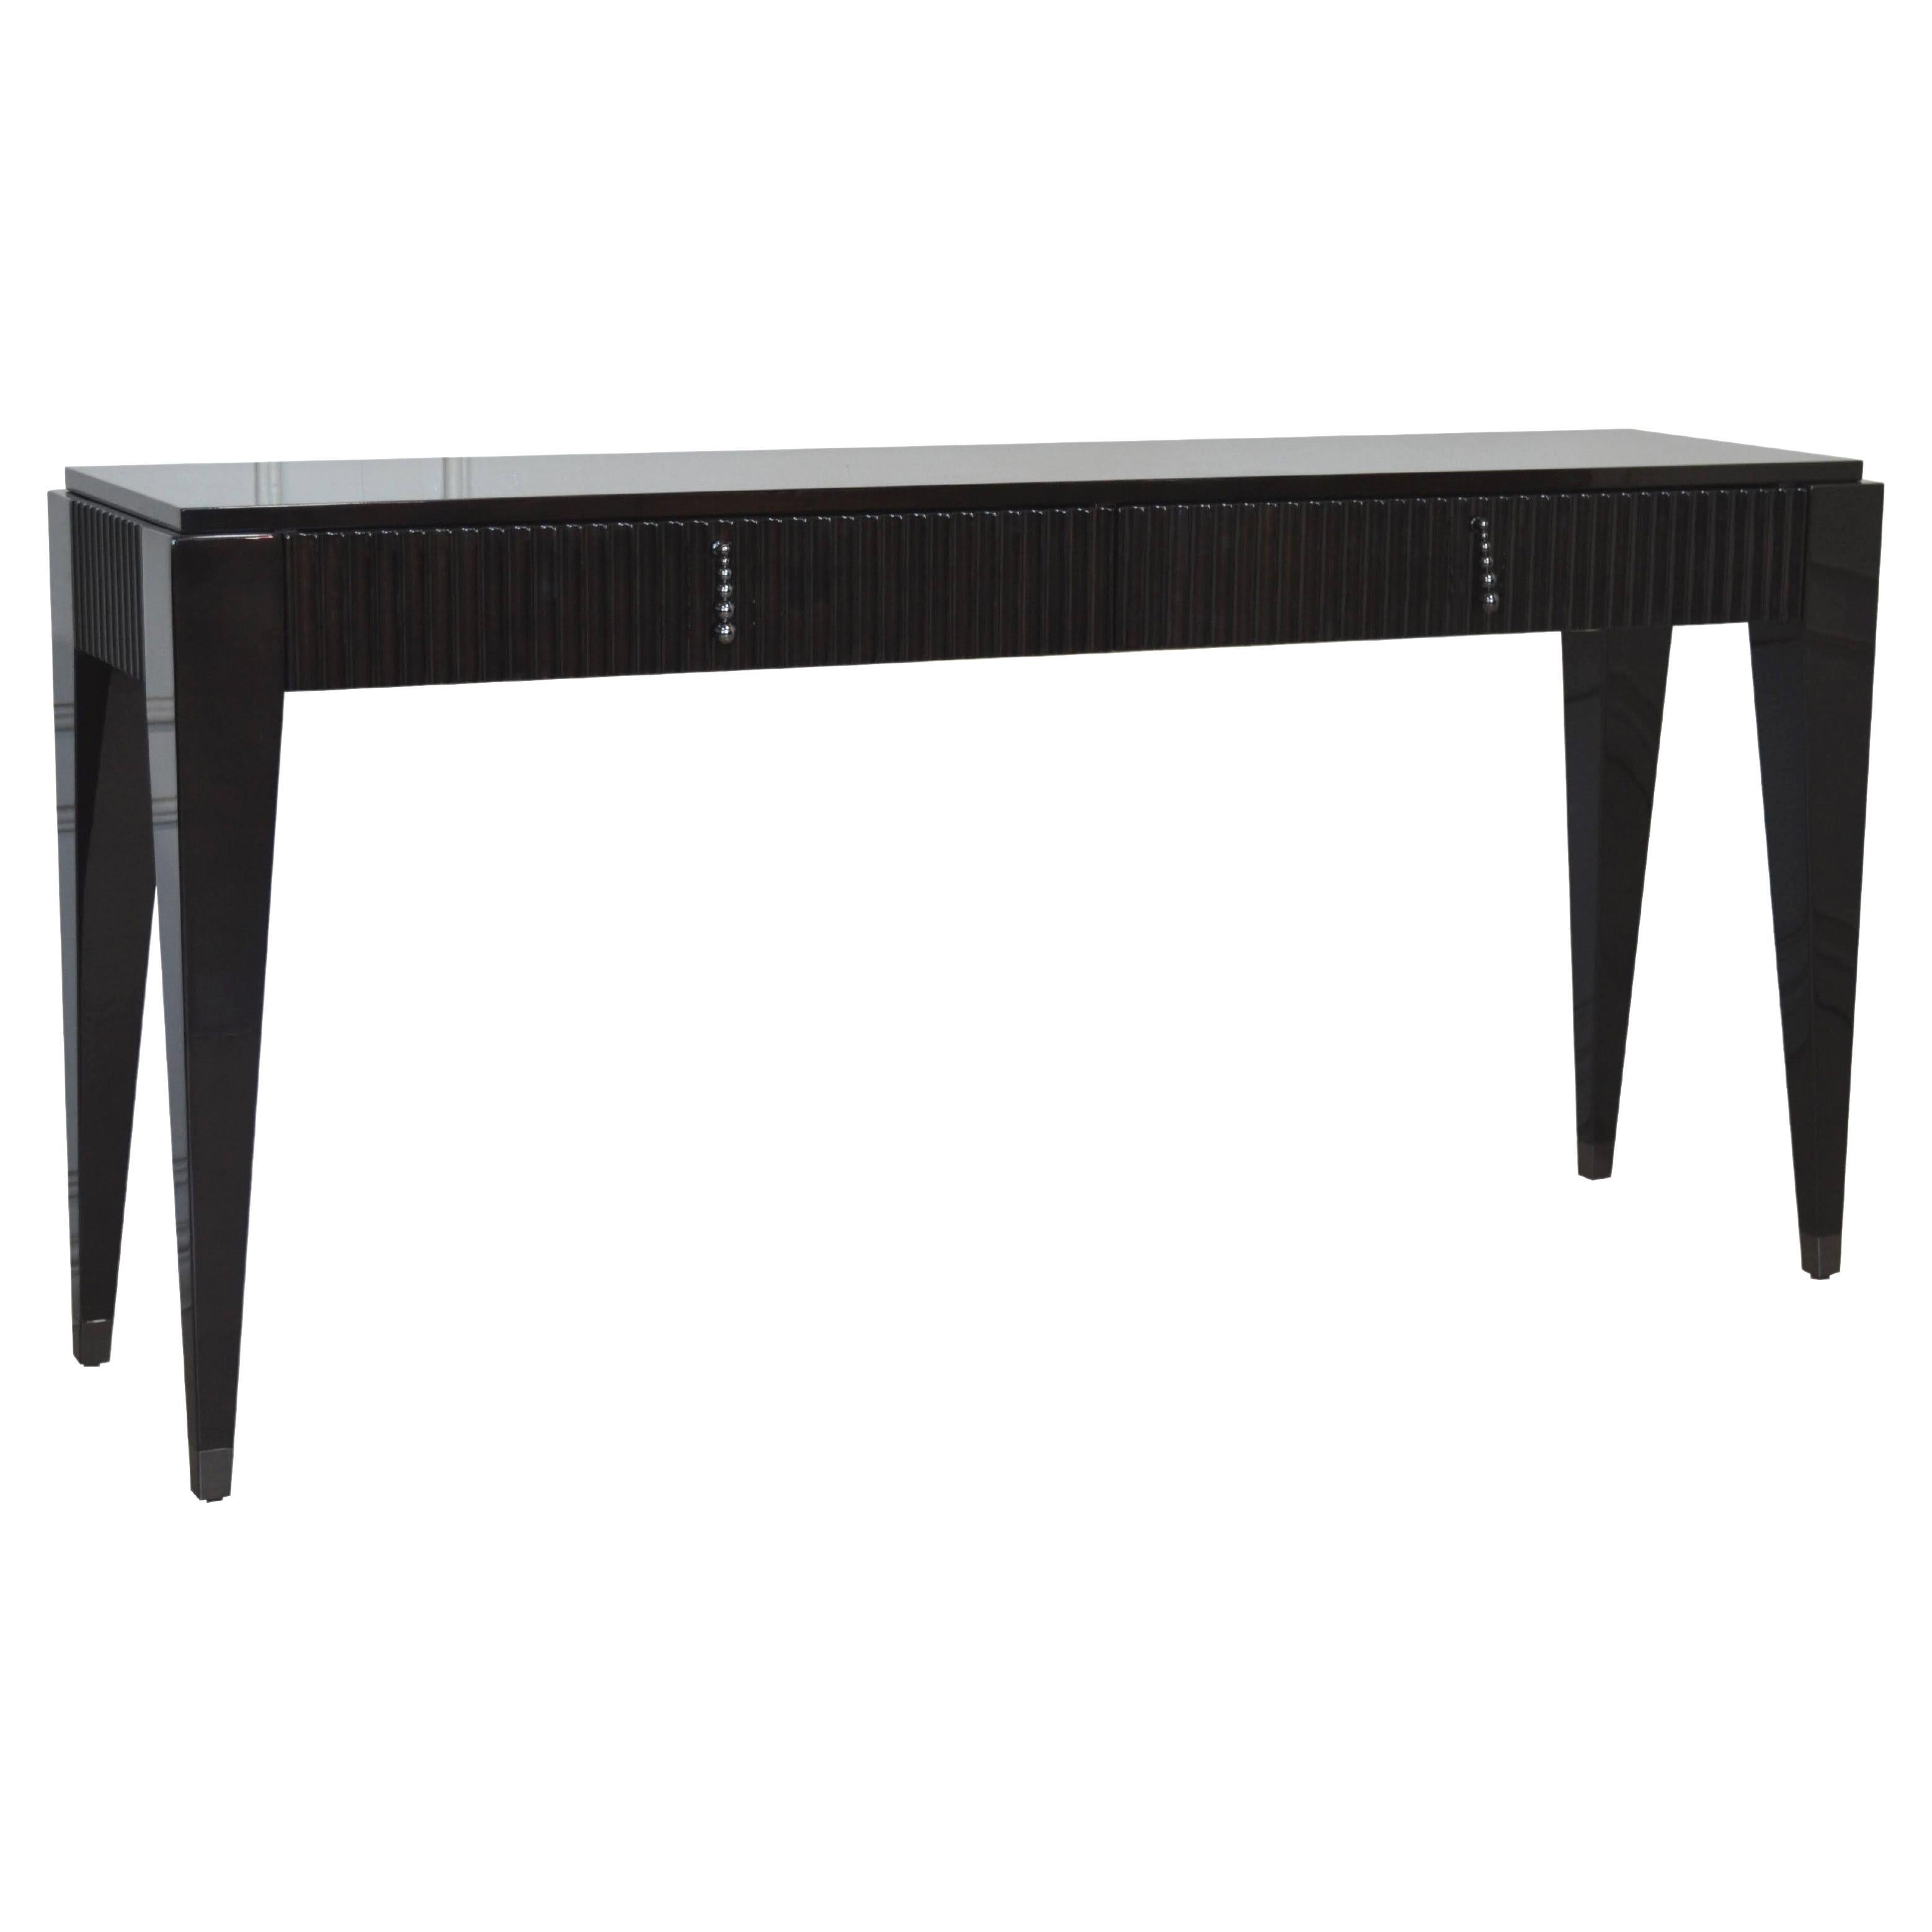 Italian Contemporary Ebony High-Gloss Console / Writing Desk with Two Drawers